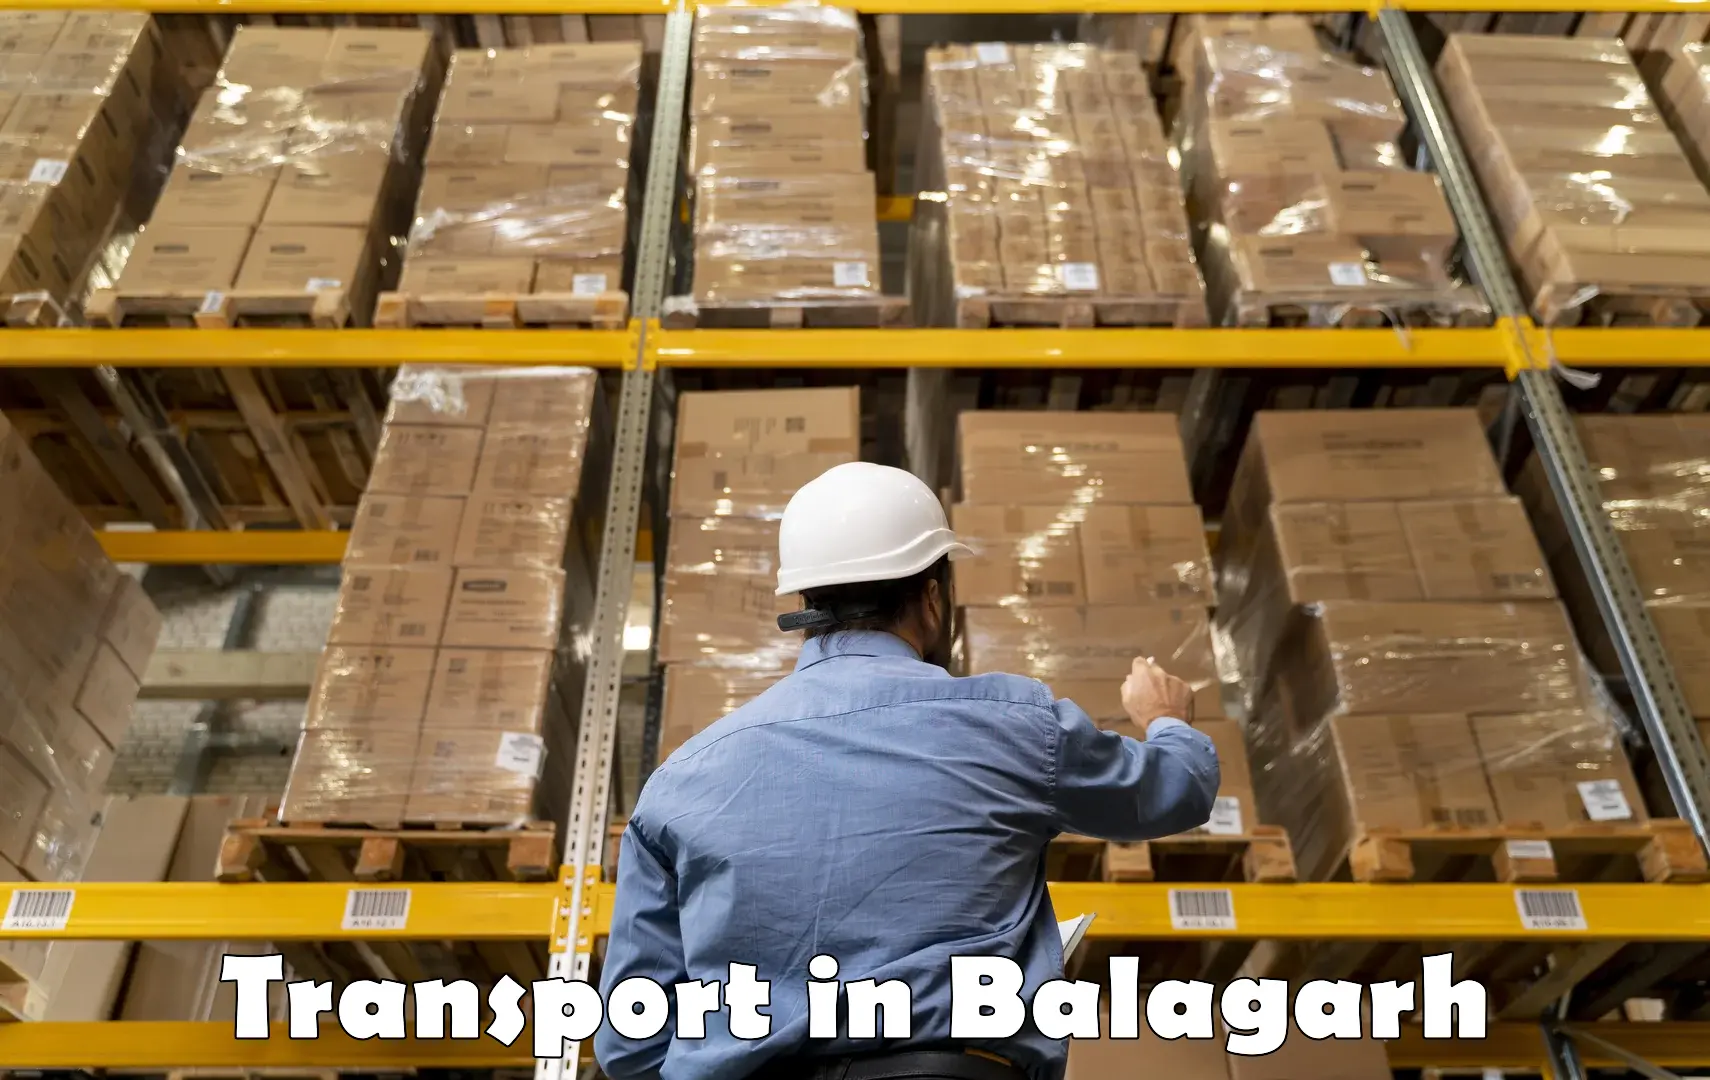 Express transport services in Balagarh